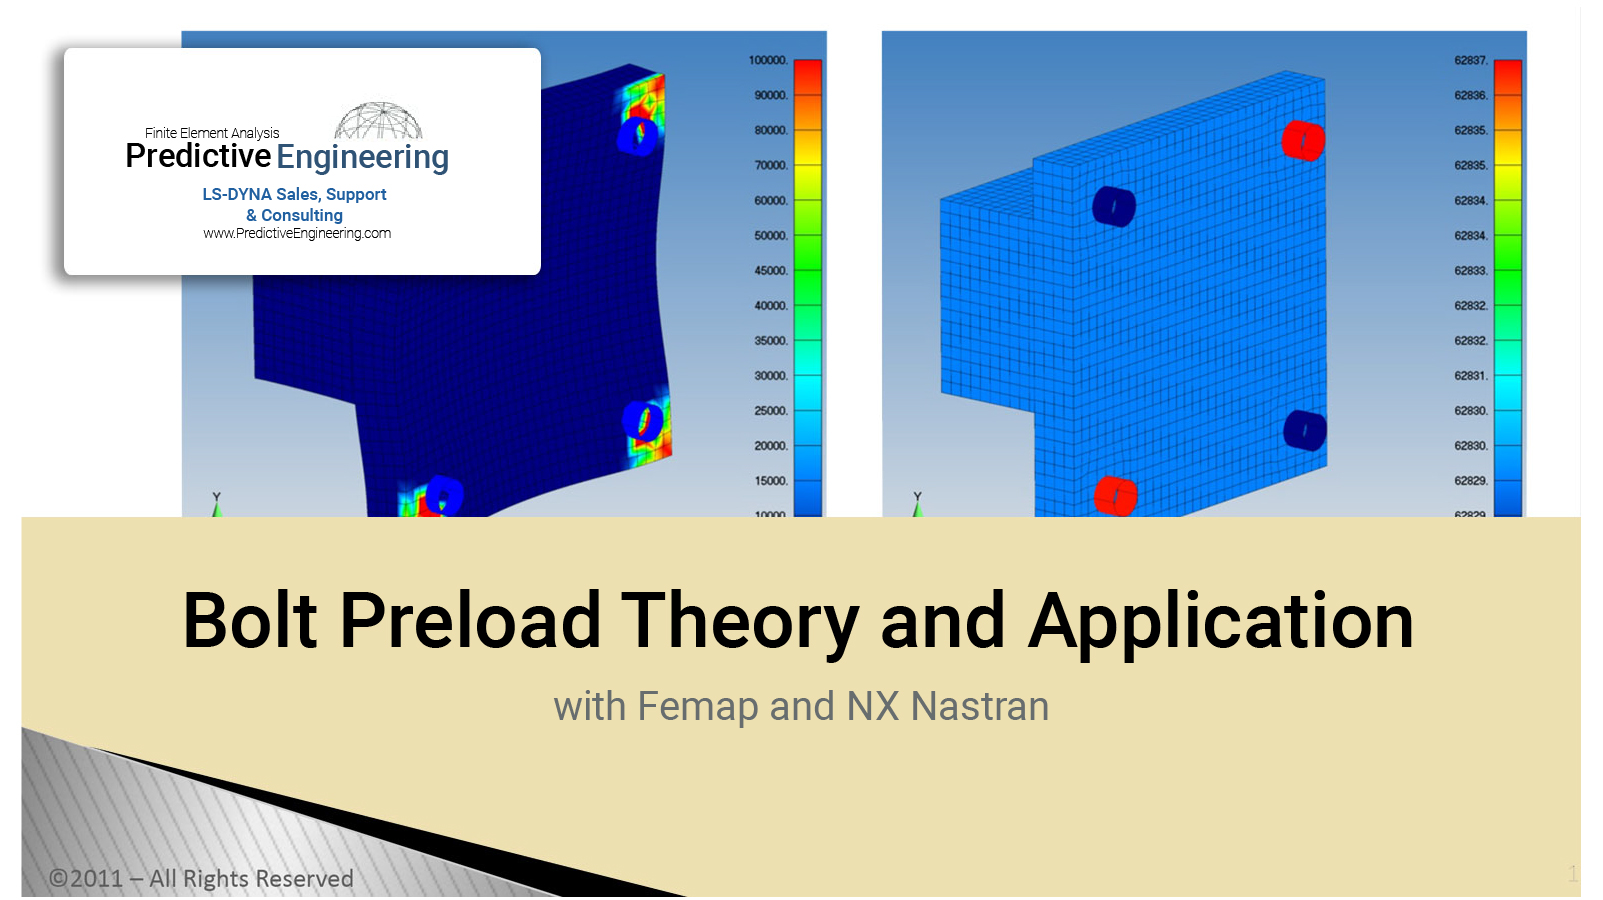 Bolt Preload with Femap and NX Nastran